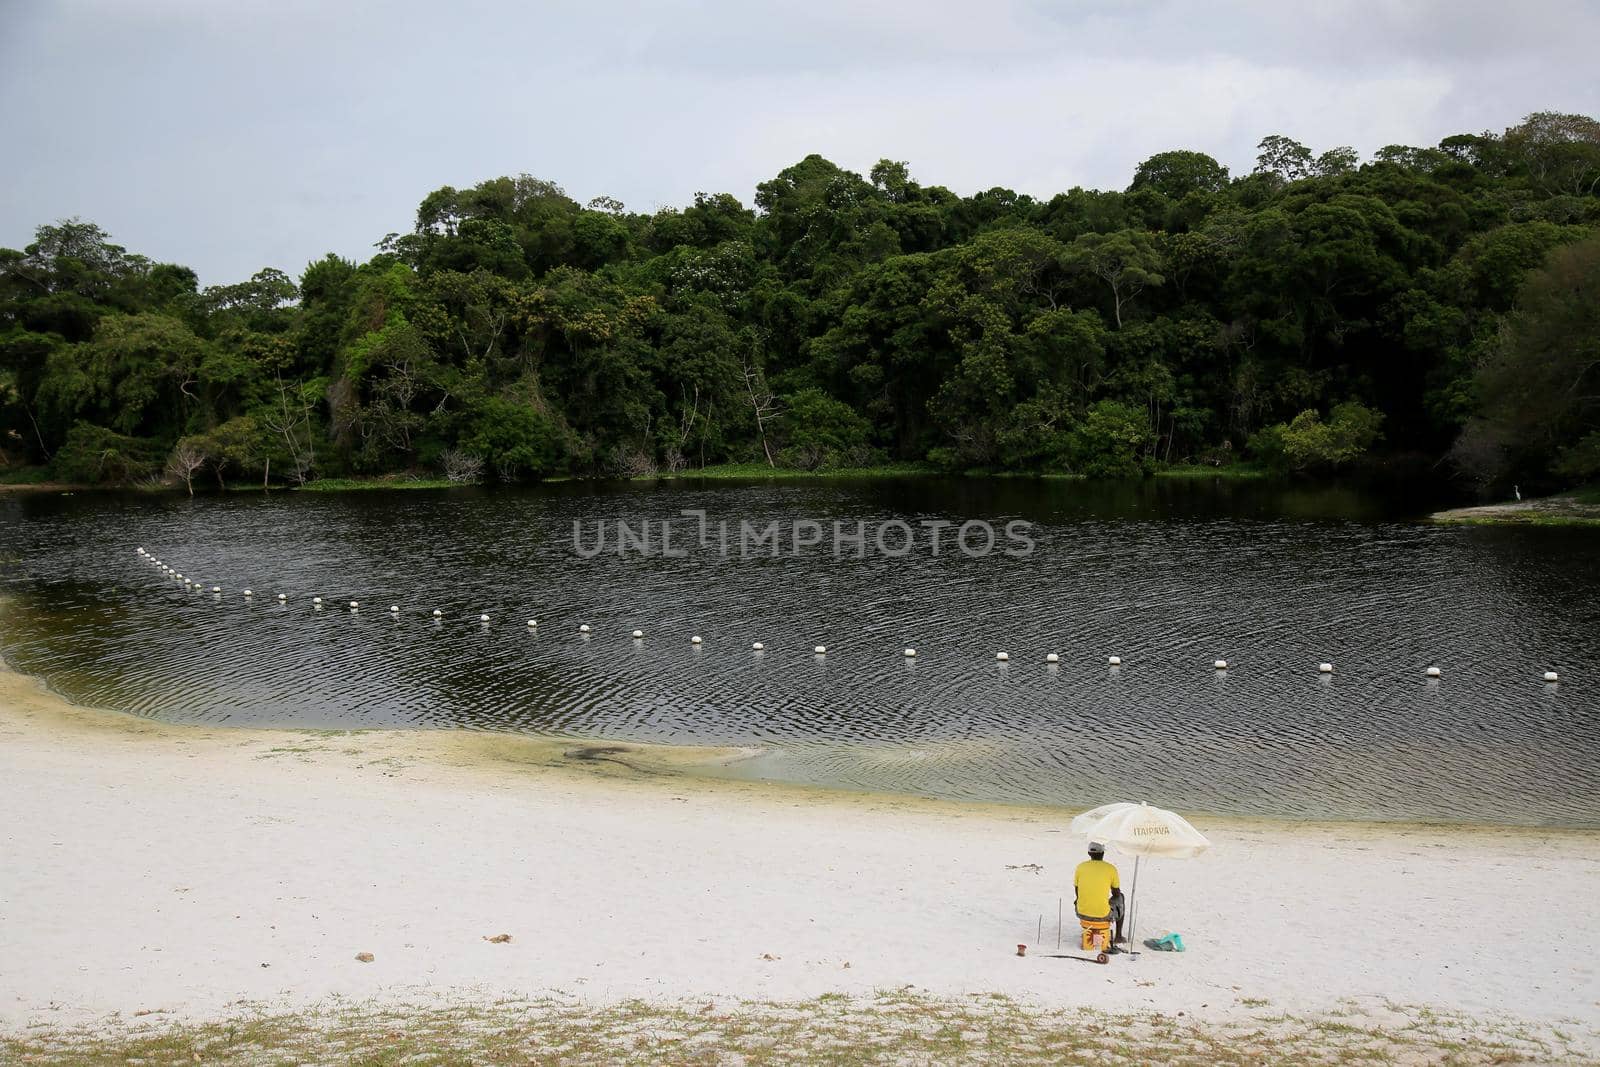 salvador, bahia, brazil - january 21, 2021: view of the waters of Lagoa do Abaete in the Itapua neighborhood in the city of Salvador.